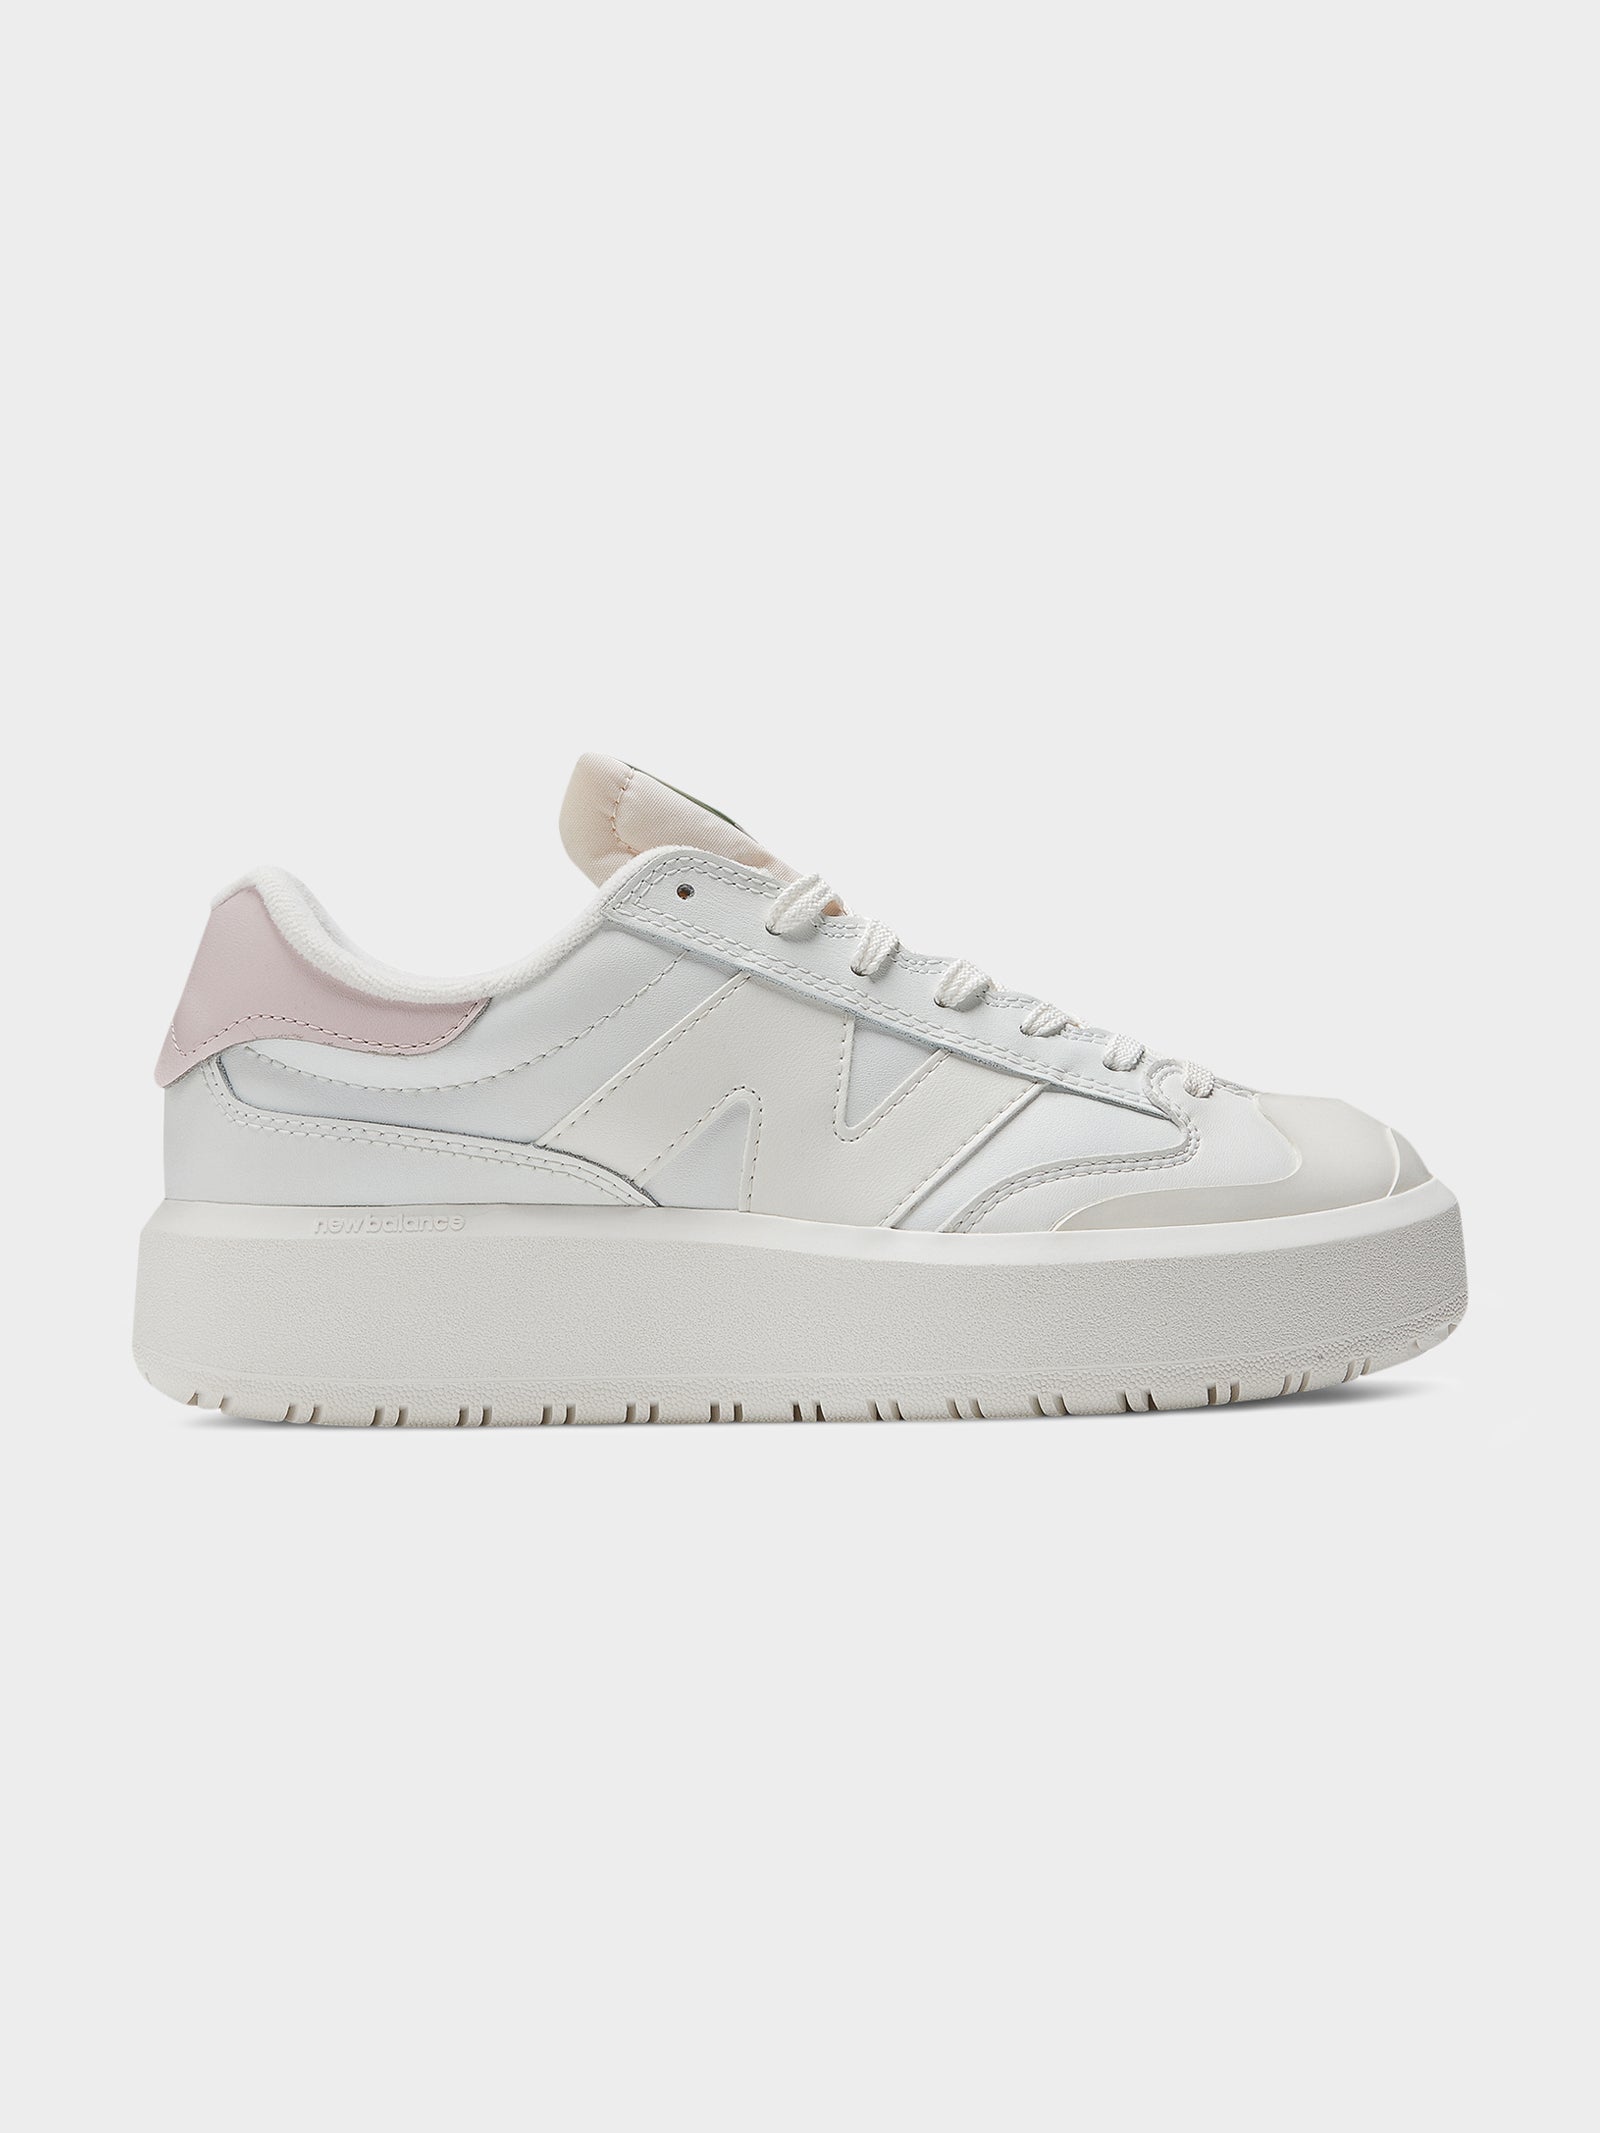 Unisex CT302 Sneakers in White, Stone Pink & Sage Leaf